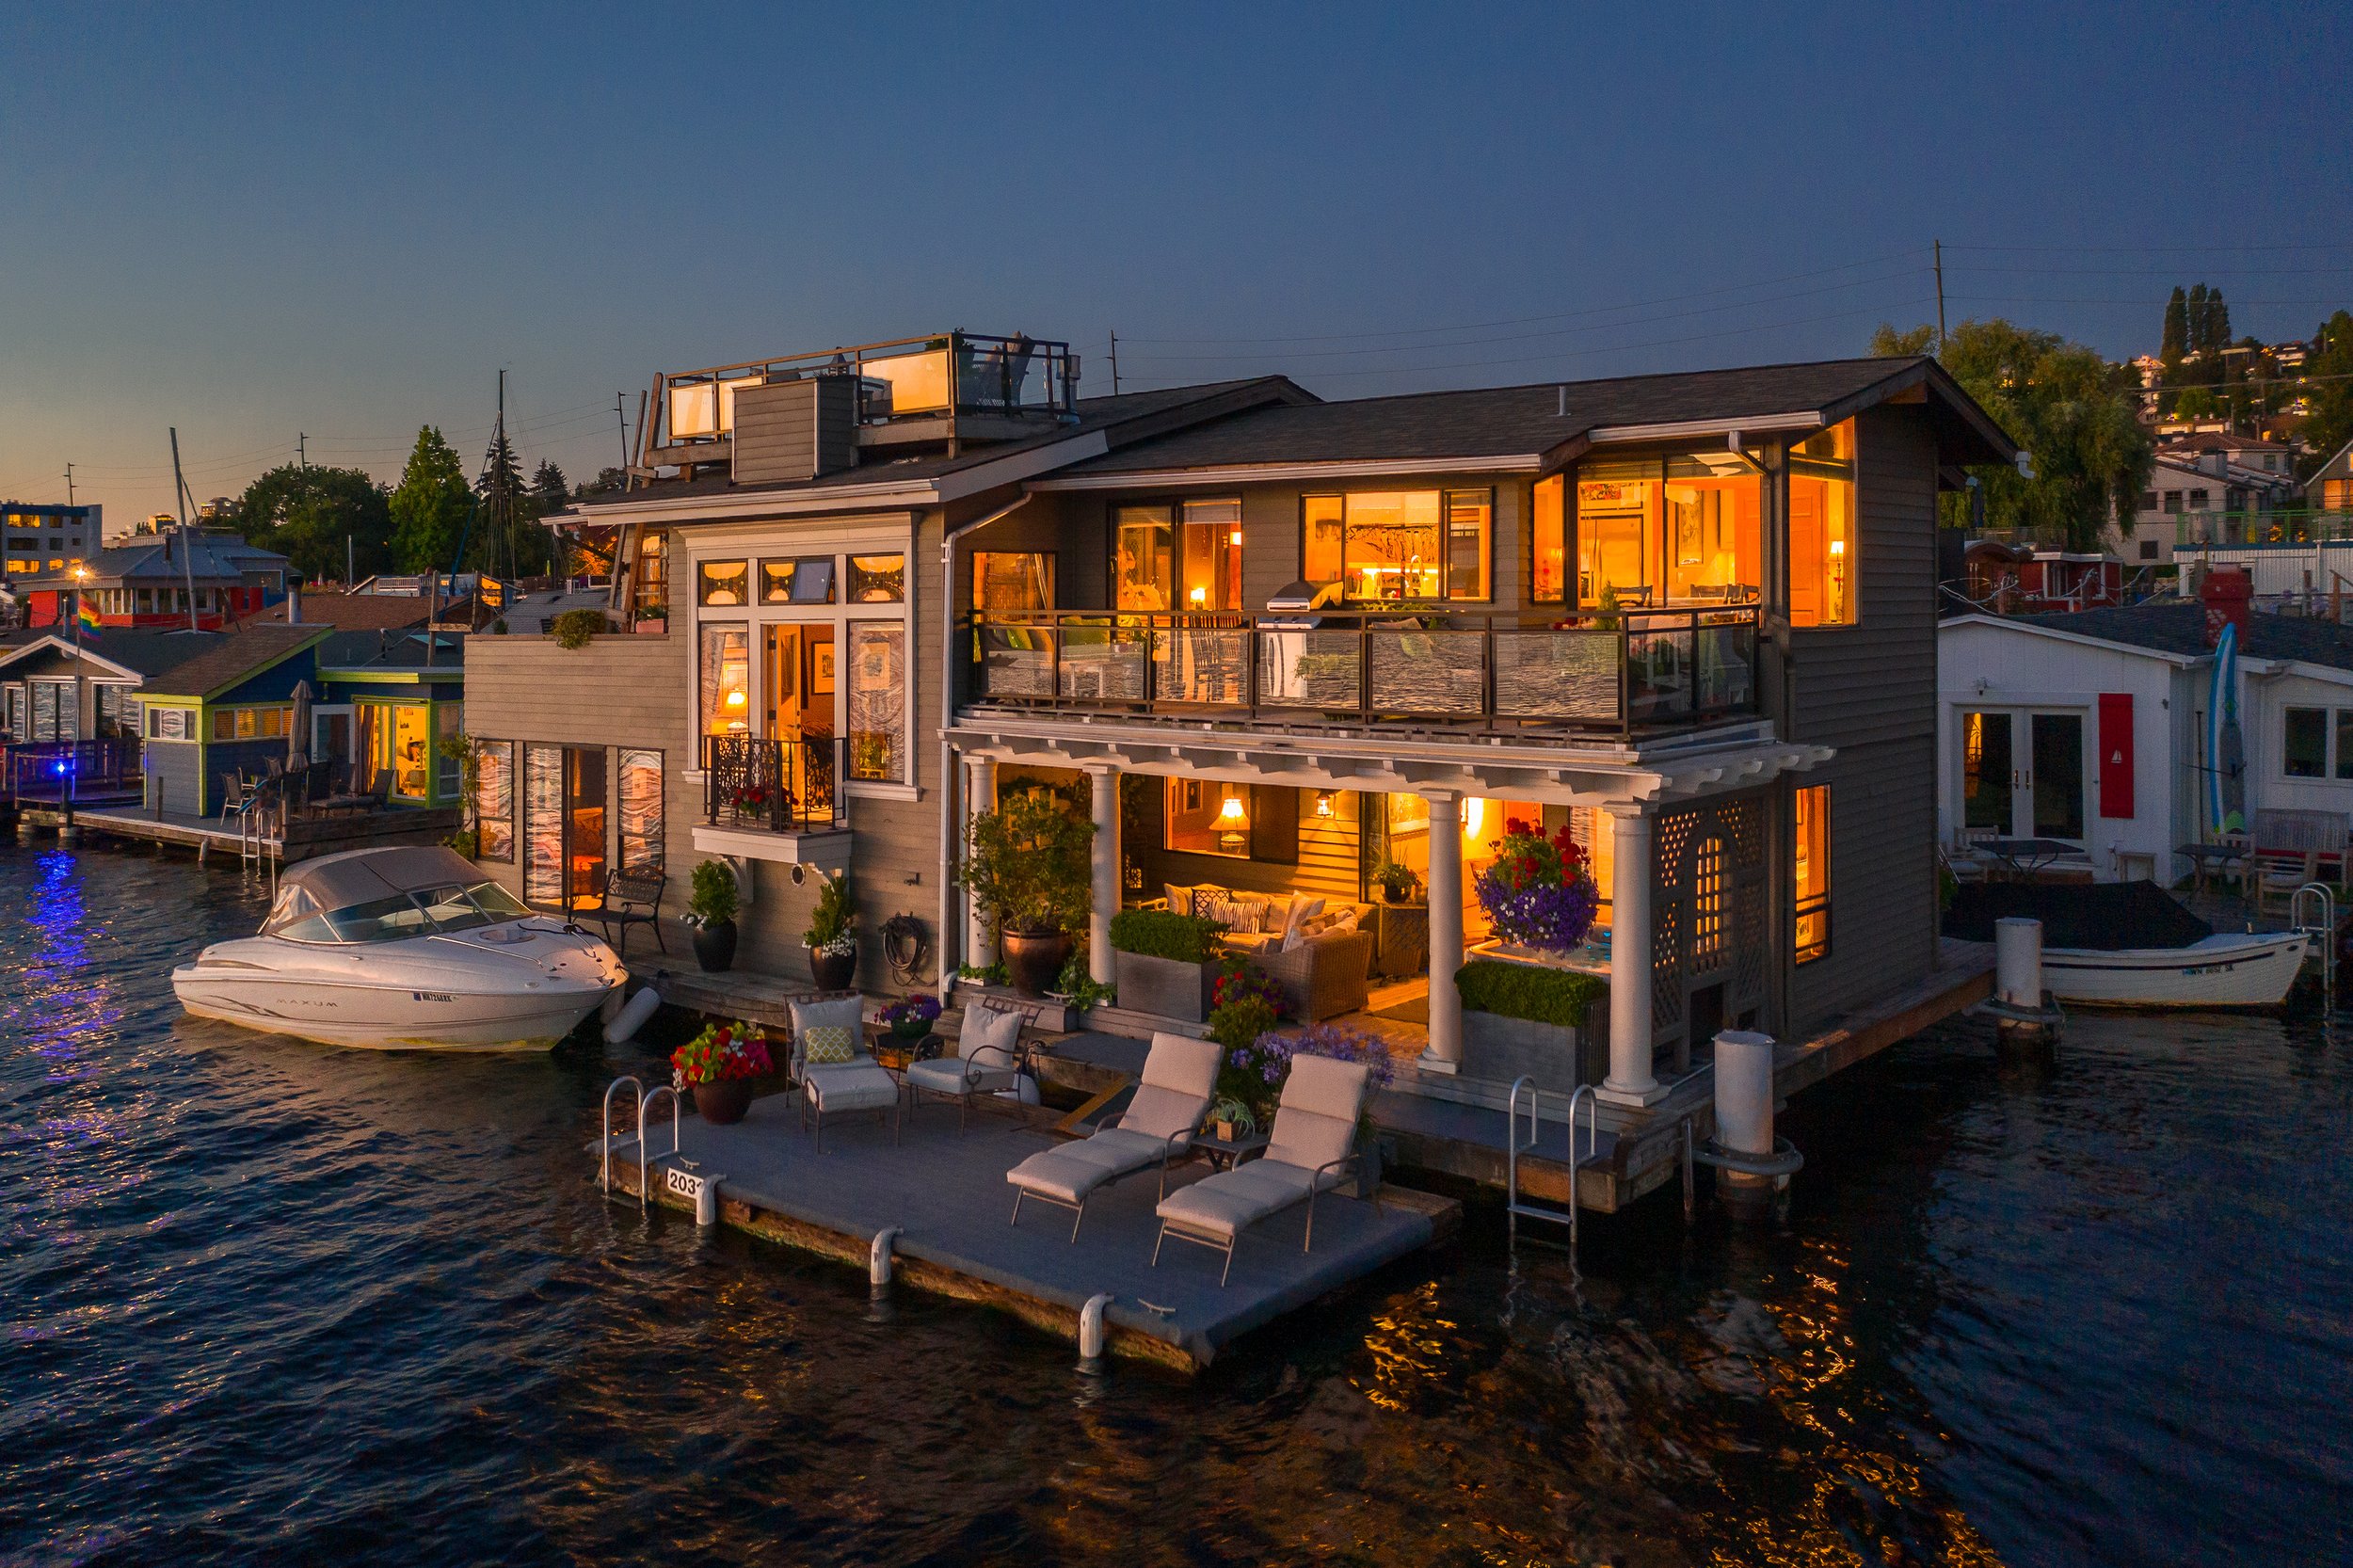 Seattle Floating home (houseboat) #H at the 2031 Fairview Ave E dock